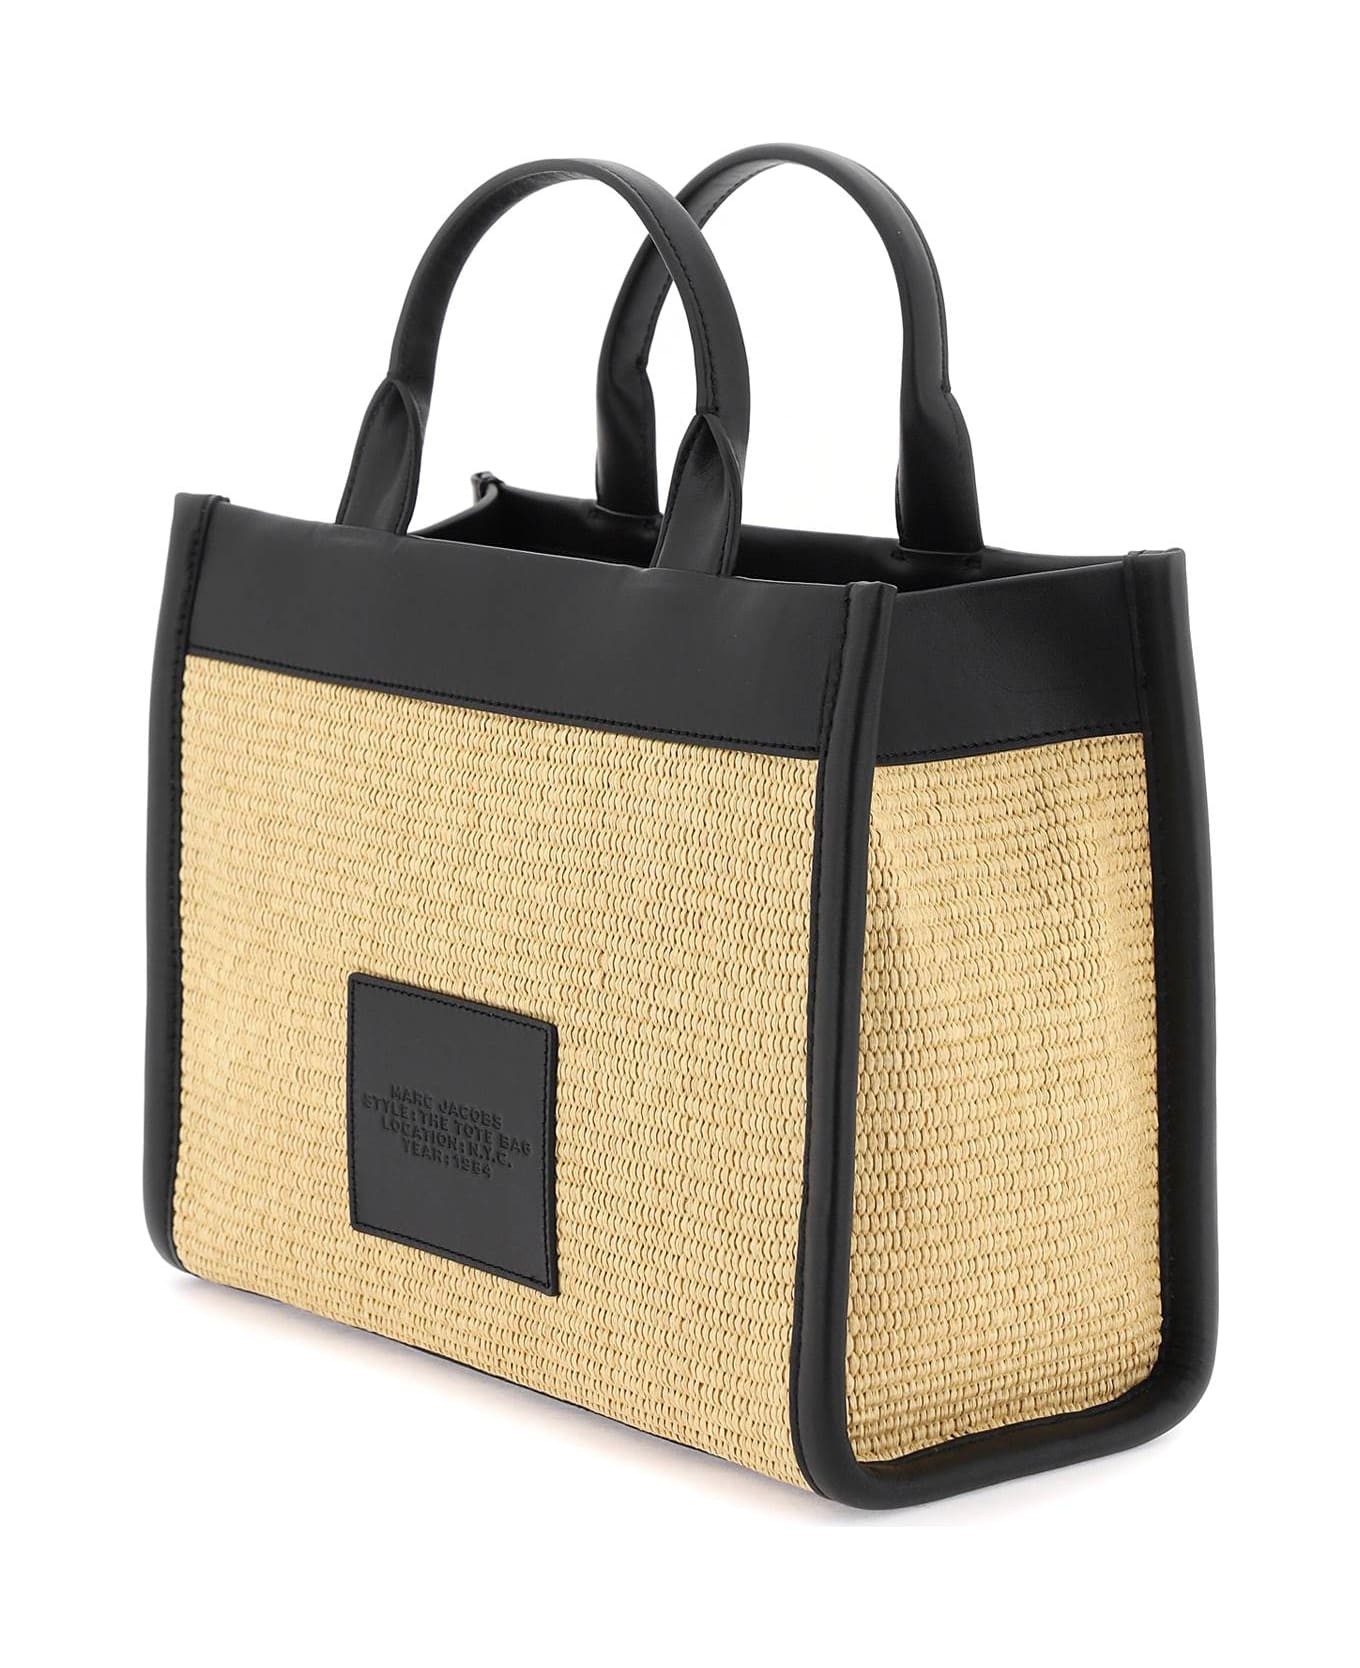 Marc Jacobs The Woven Medium Tote Bag - Beige